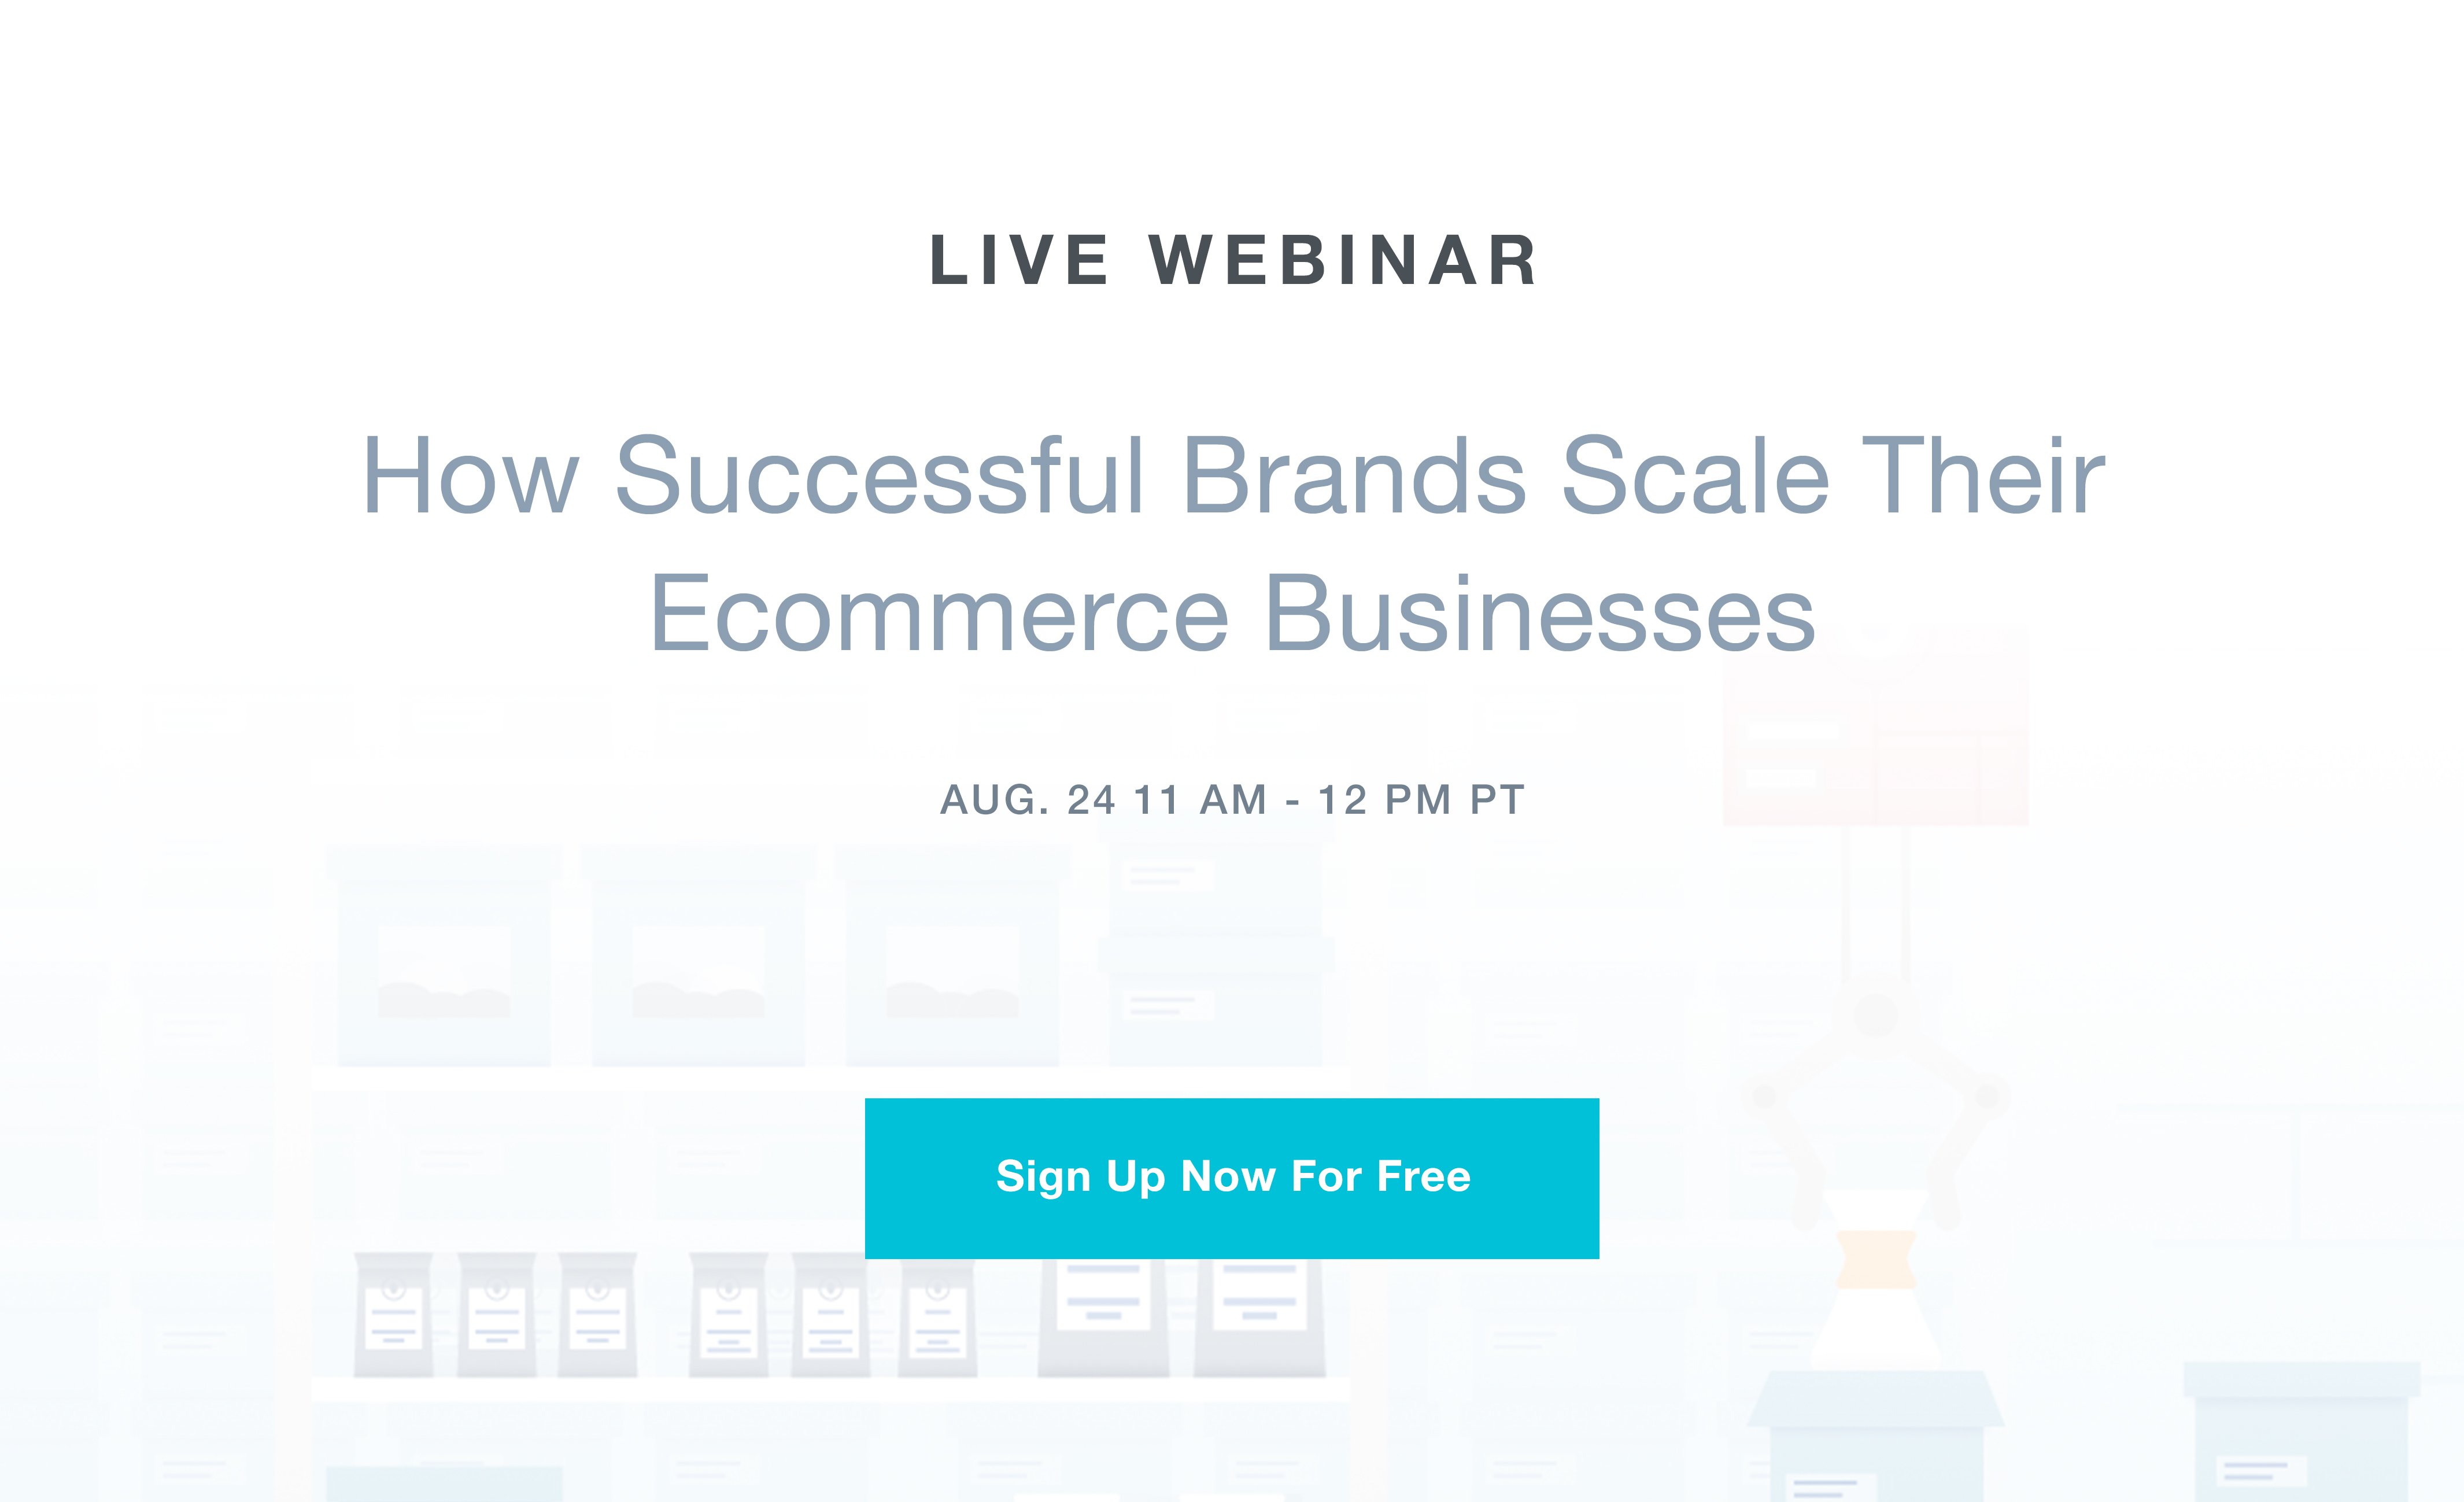 Live Webinar: How Successful Brands Scale Their Ecommerce Businesses: Free Sign-Up Link